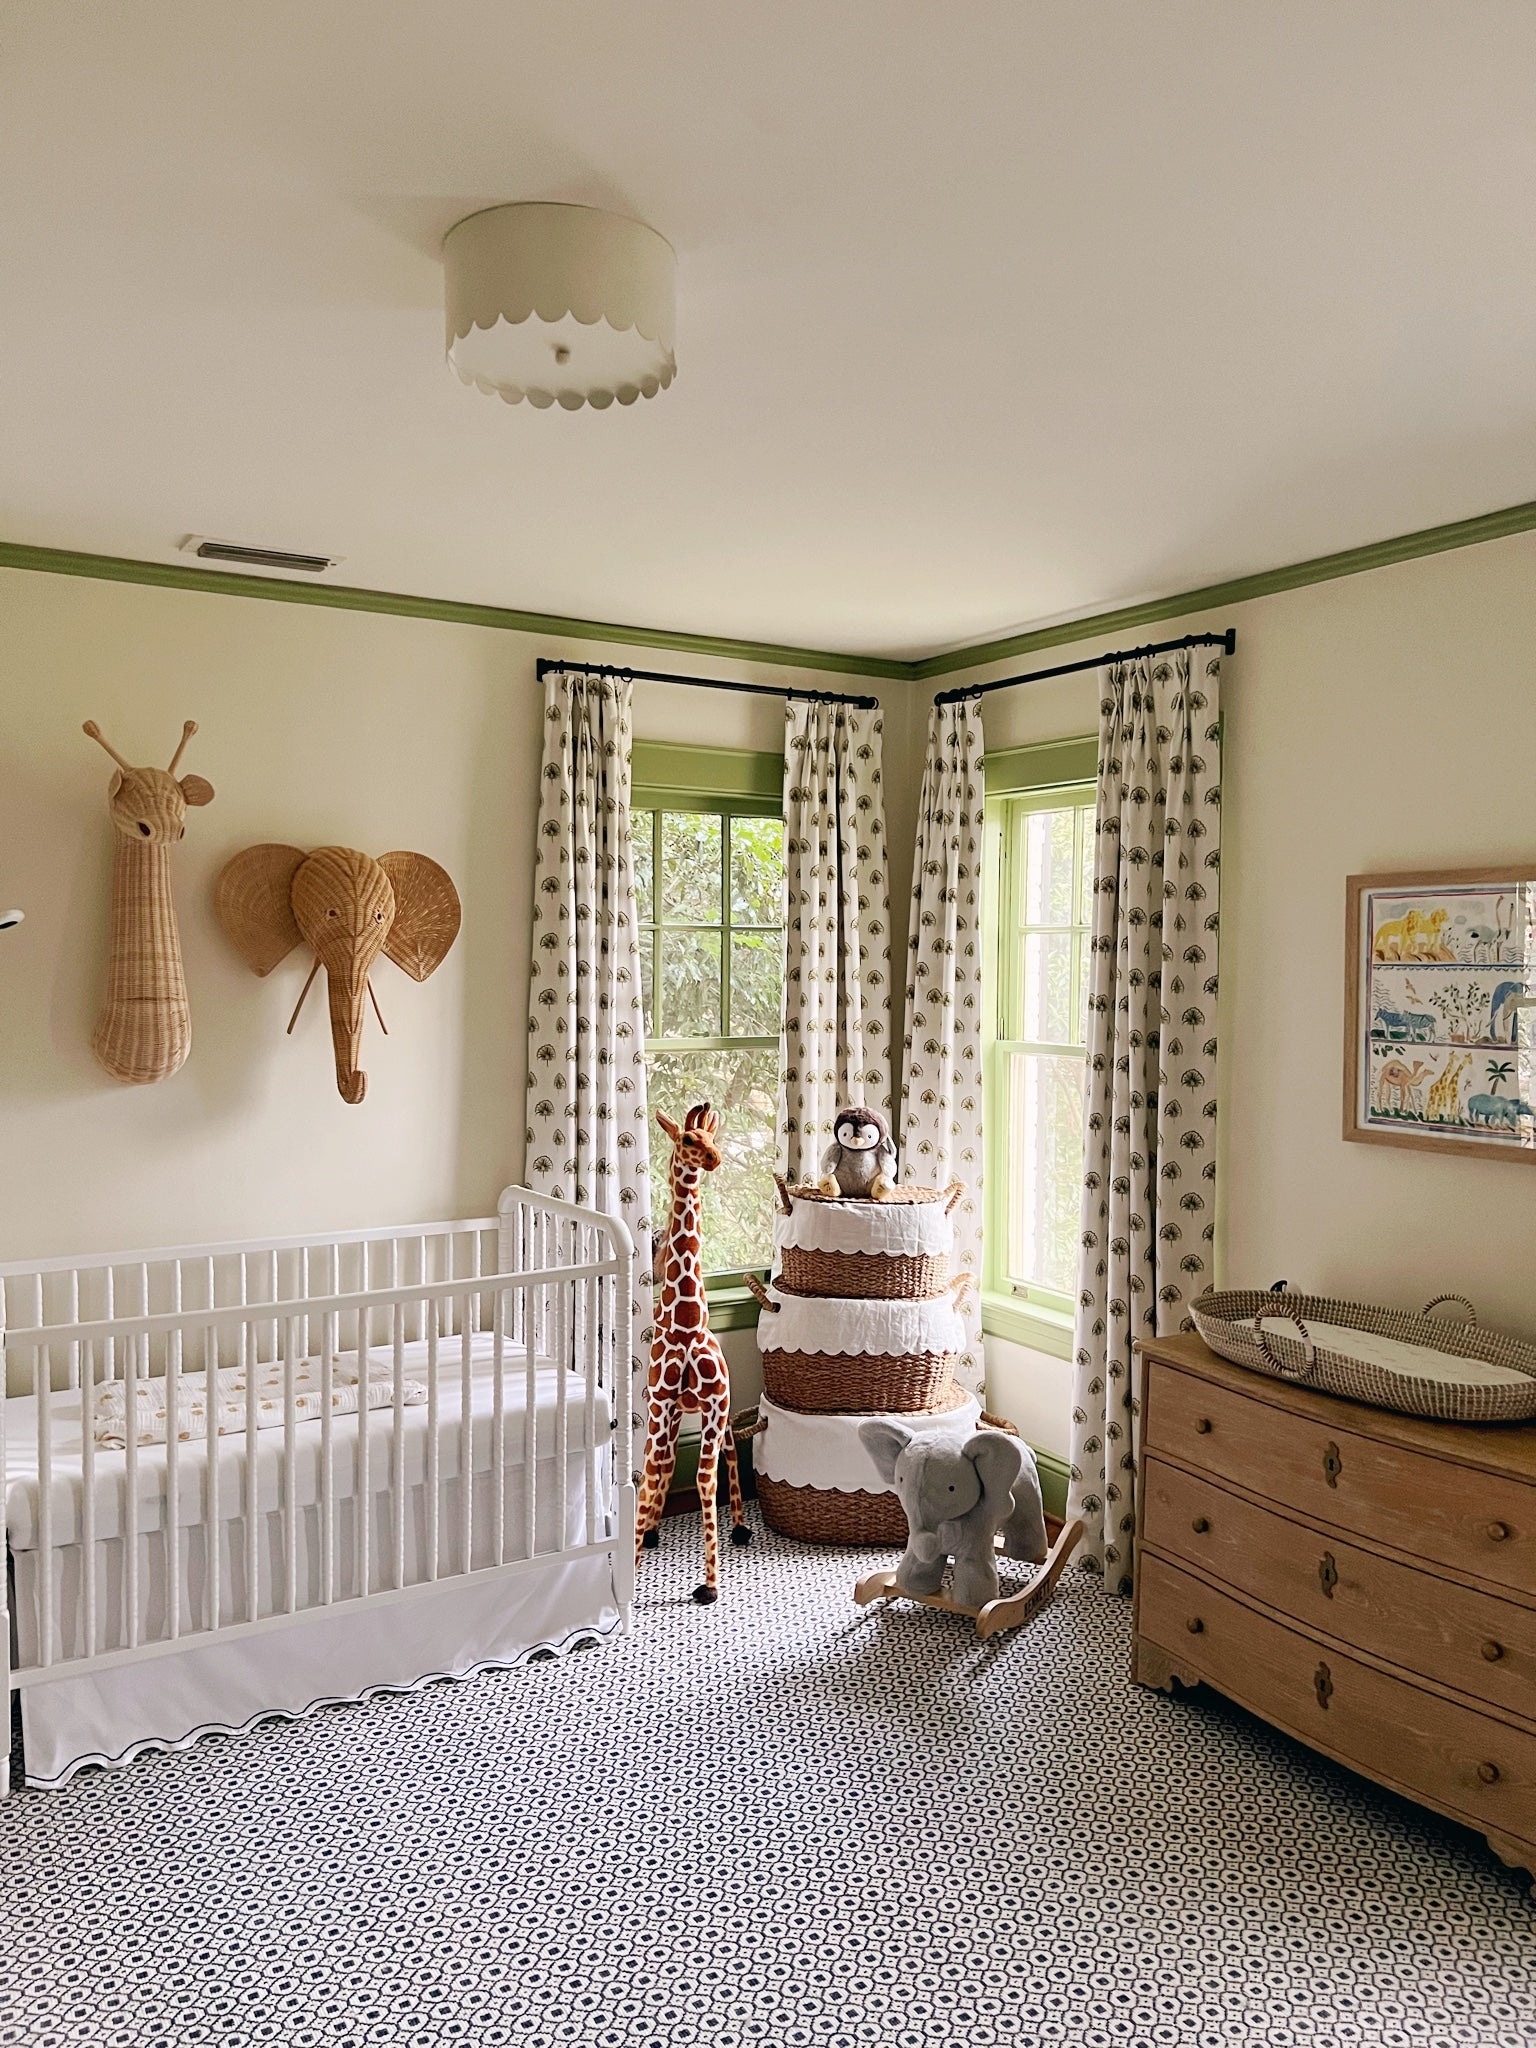 Green floral custom curtains hanging on a rod in a green painted nursery styled with a white crib and rattan animals